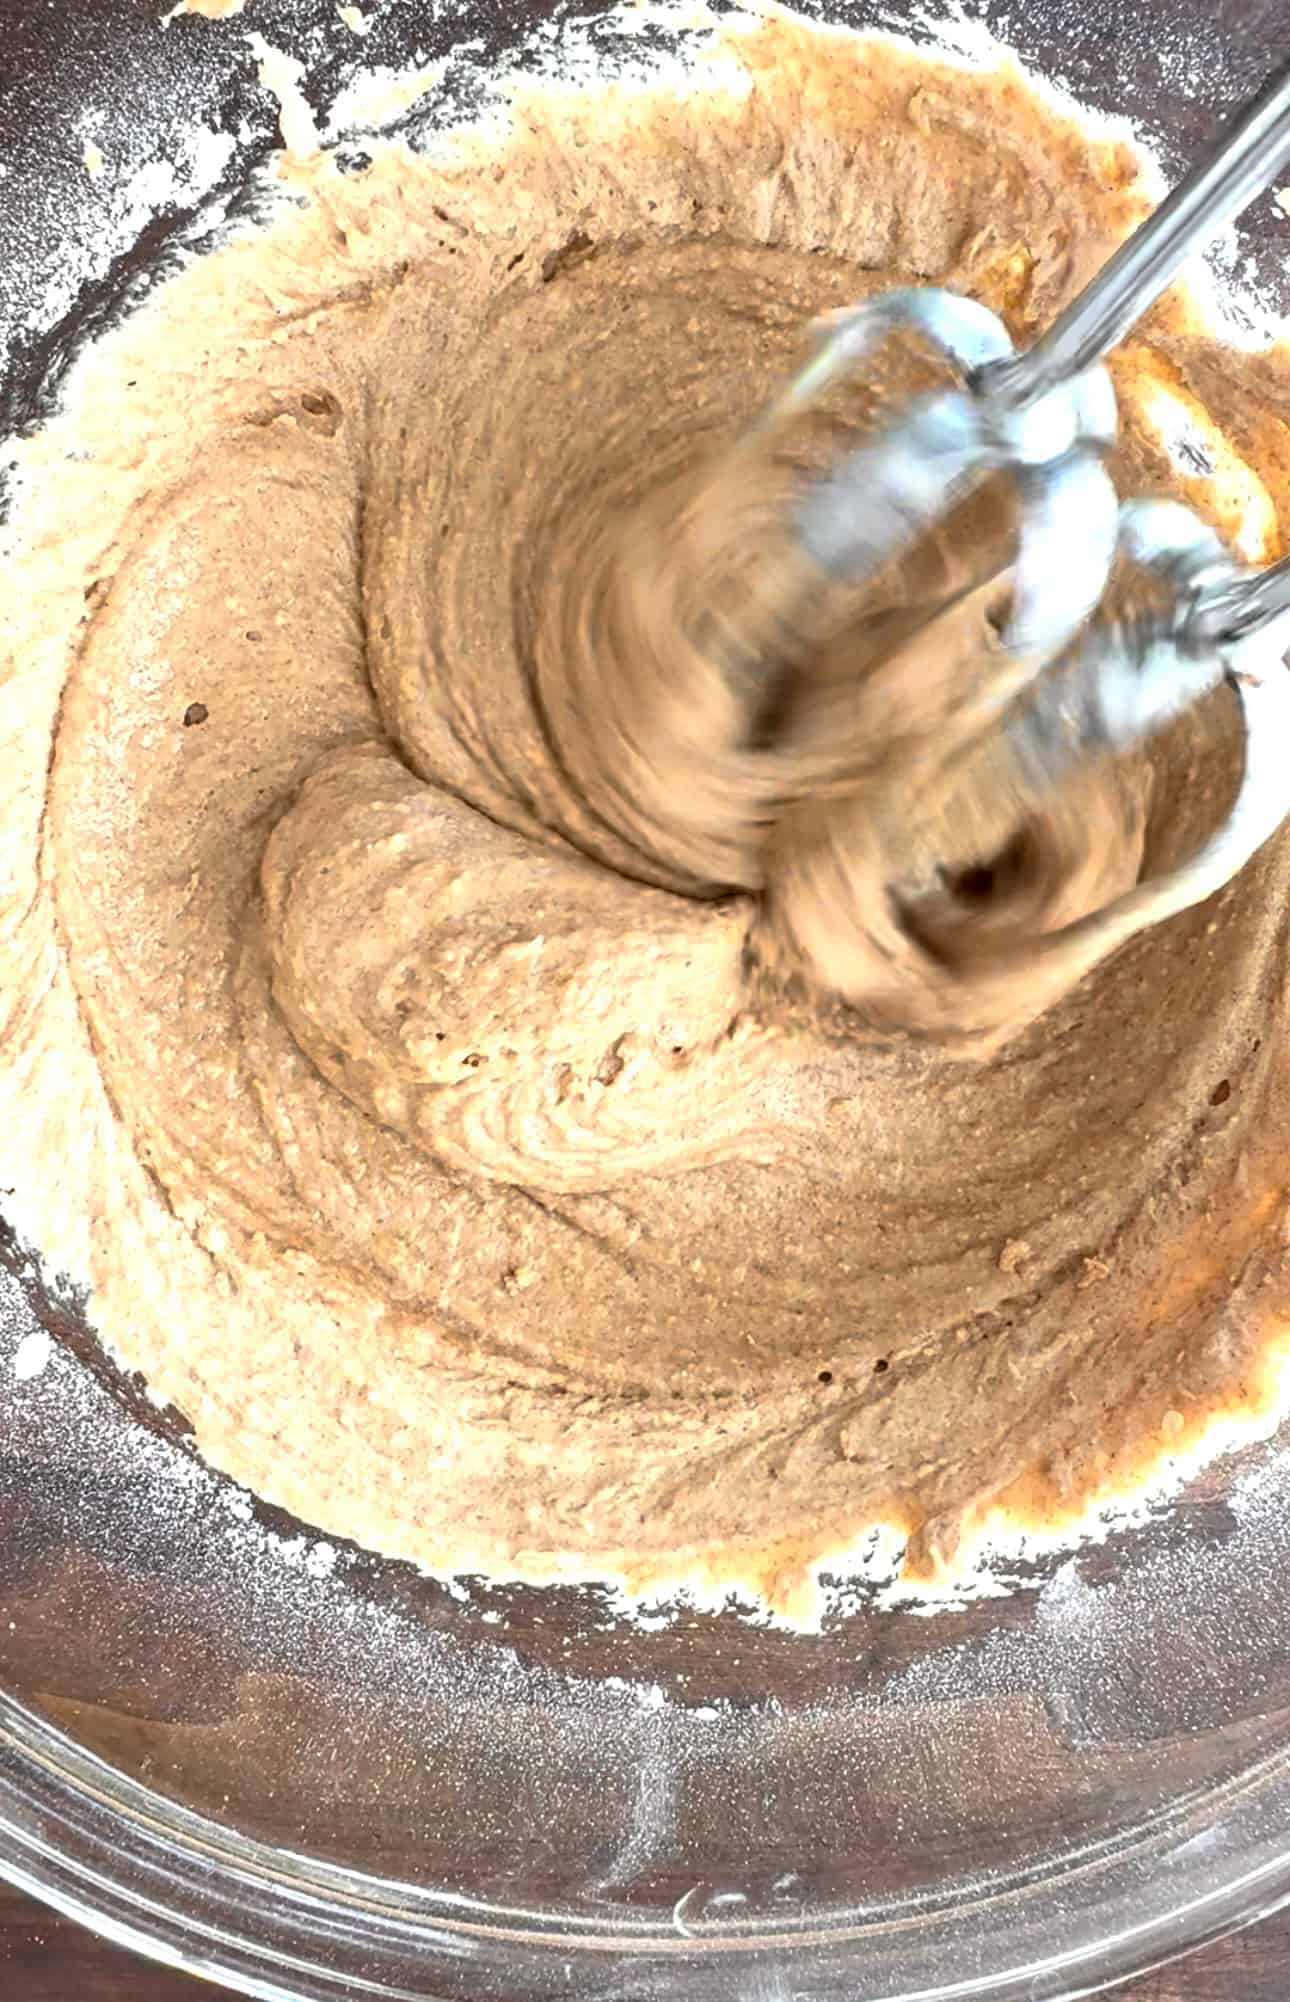 Cake batter being mixed with a hand mixer.